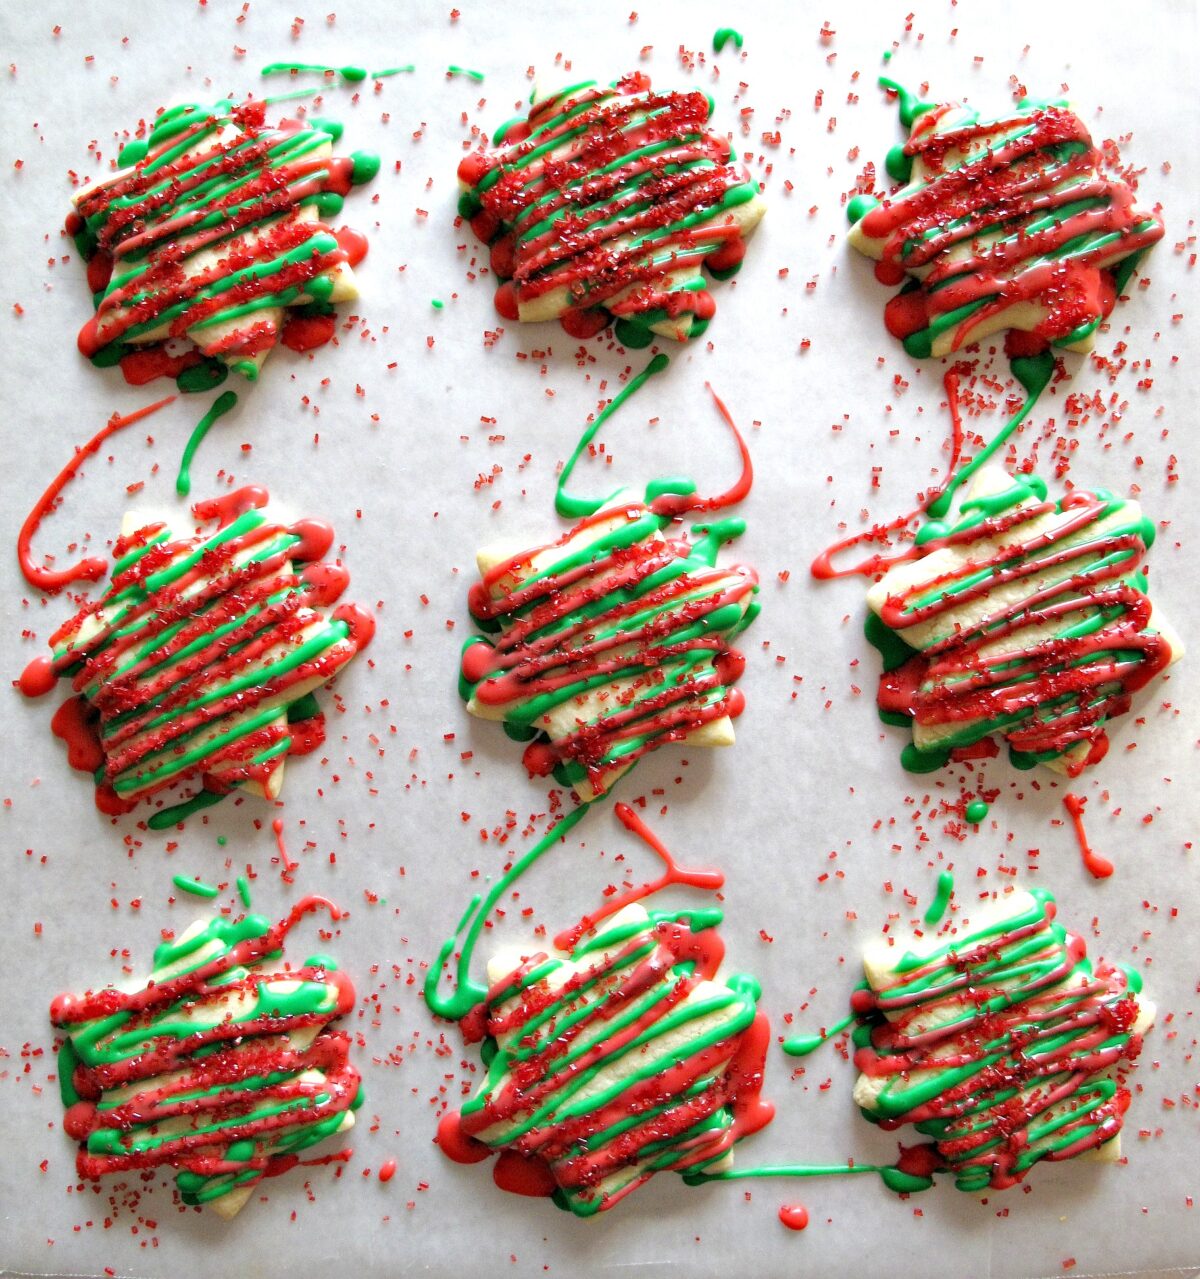 Star cookies decorated with red and green icing zigzags and red sugar.